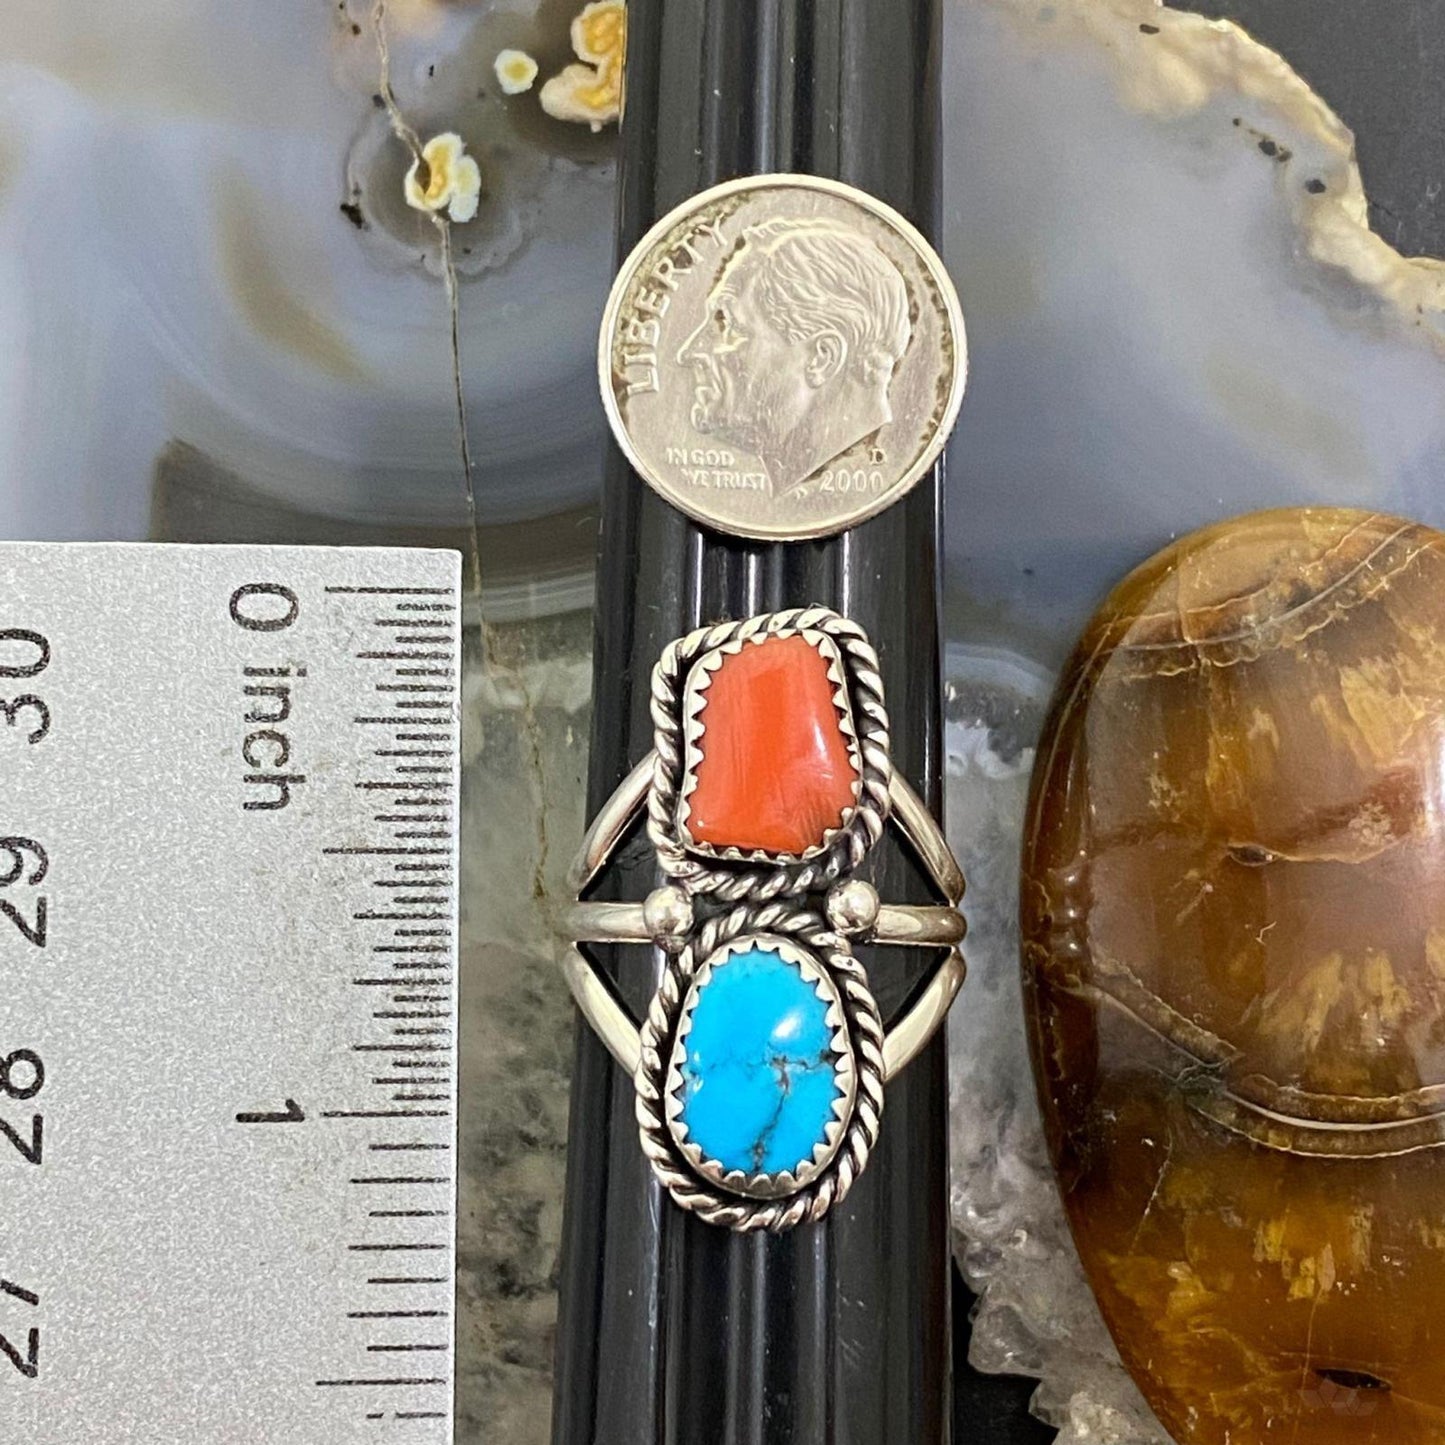 Native American Sterling Silver Turquoise & Coral Ring Size 8.25 For Women